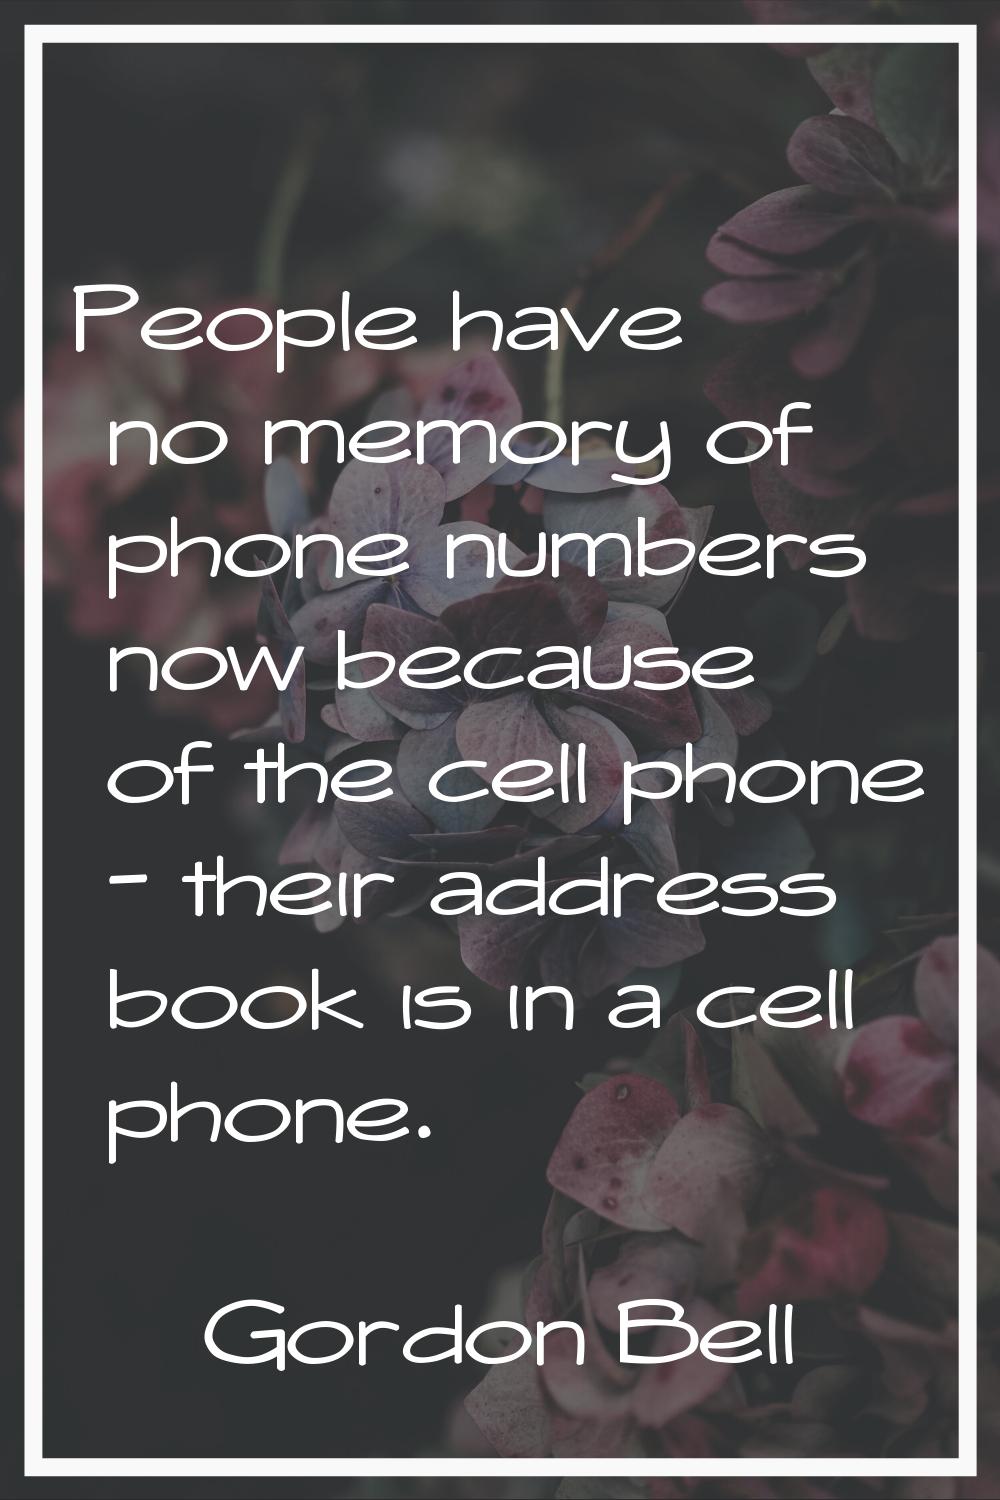 People have no memory of phone numbers now because of the cell phone - their address book is in a c